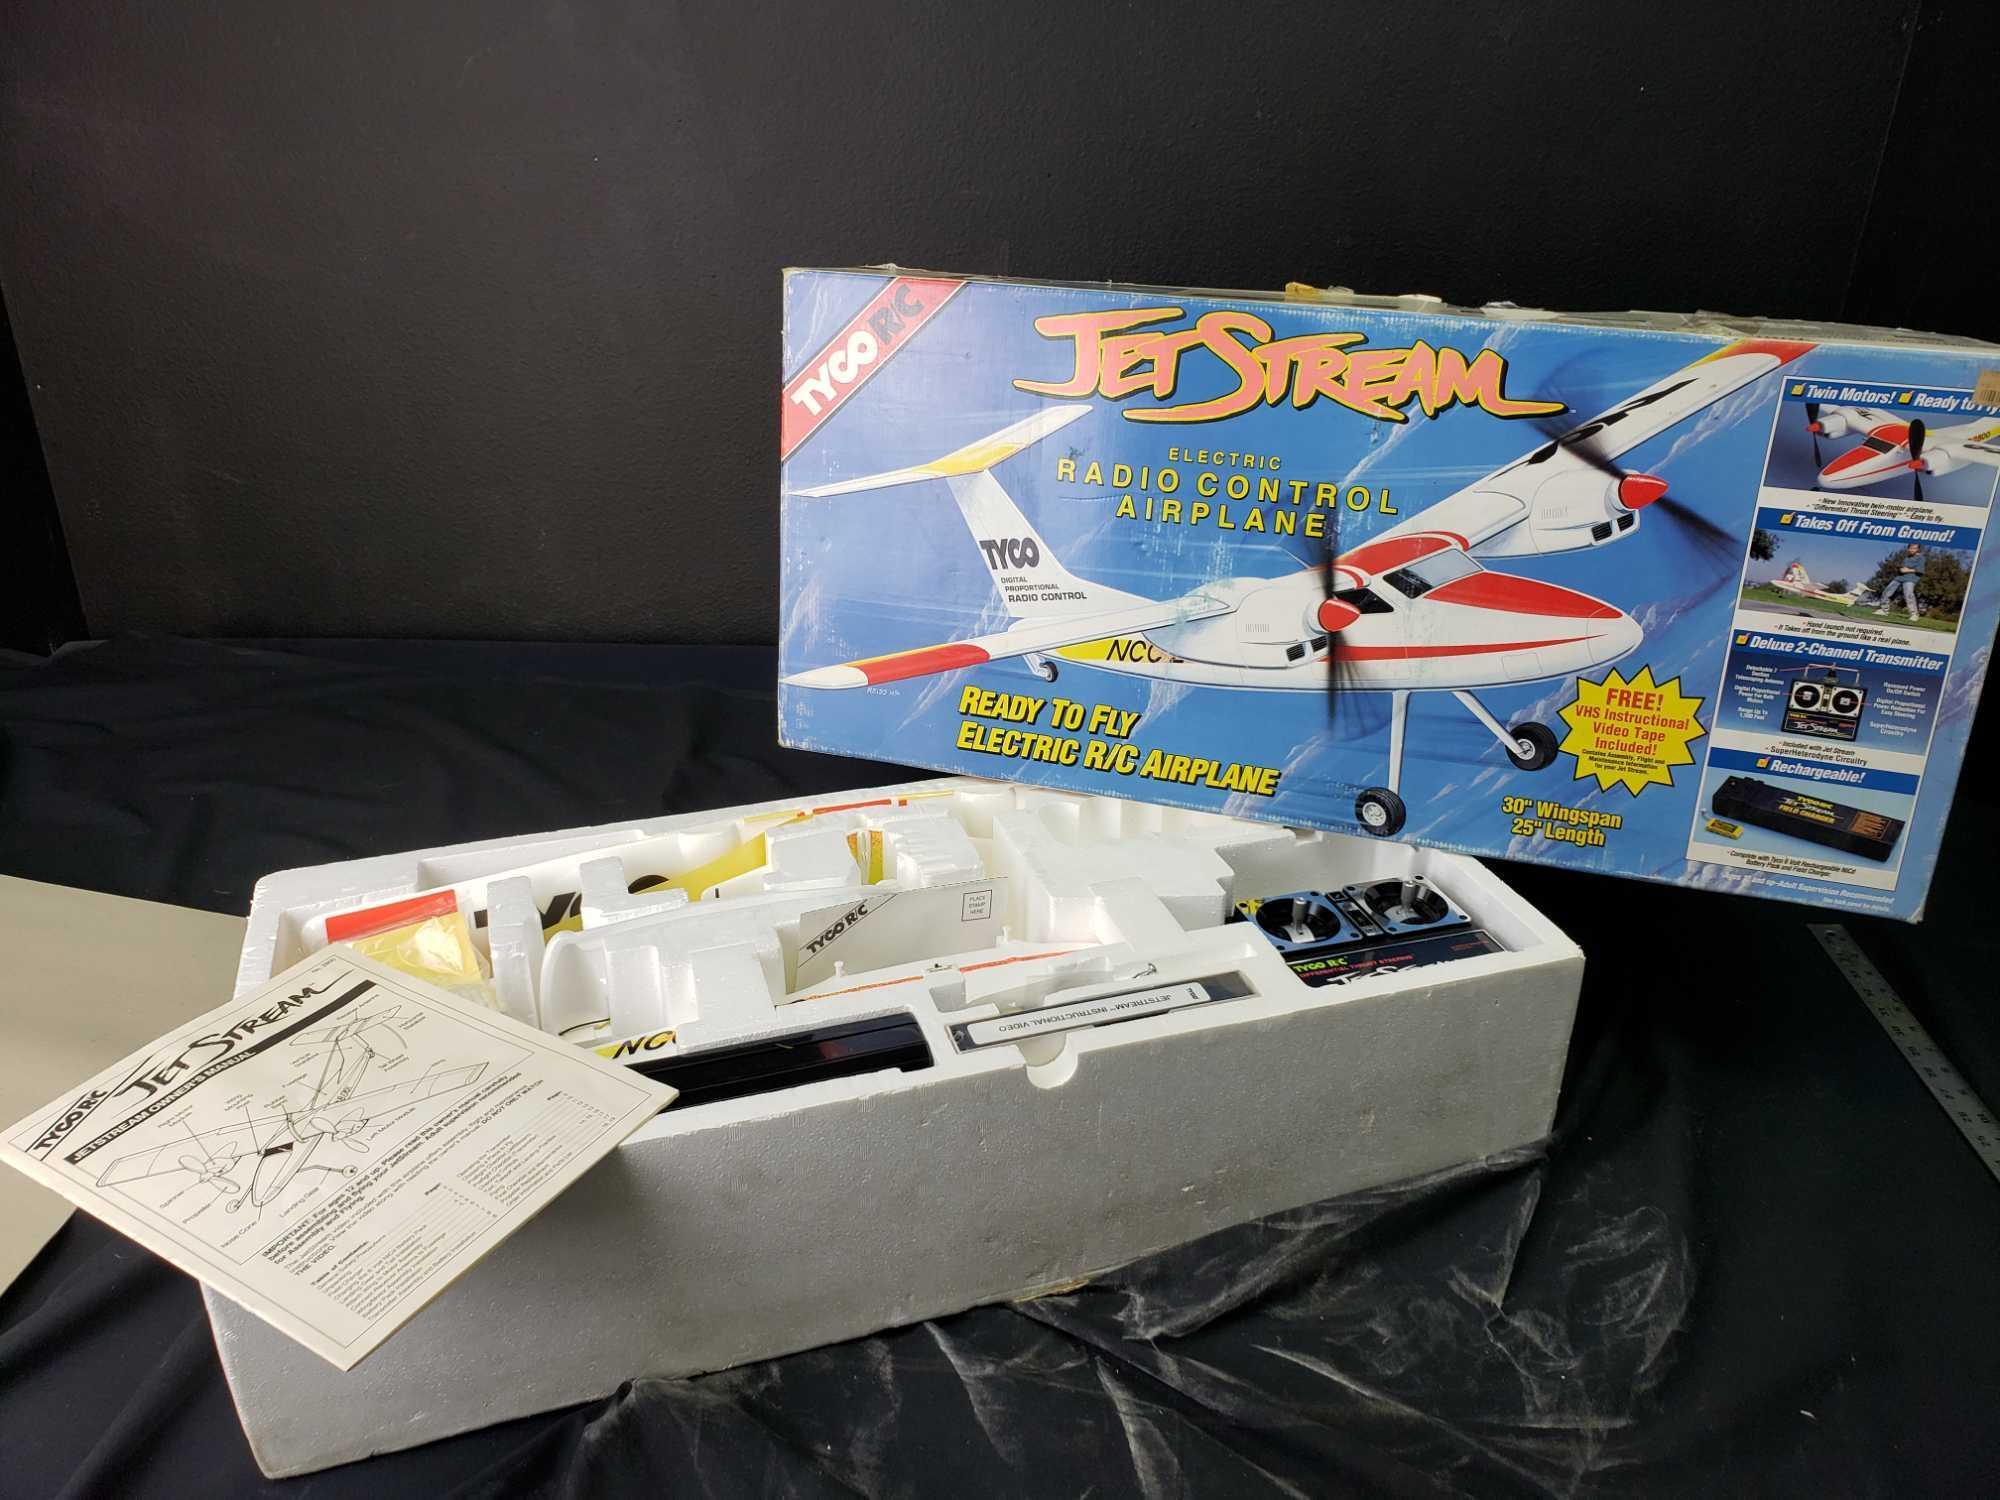 Tyco Rc Airplane: Benefits of Owning a Tyco RC Airplane